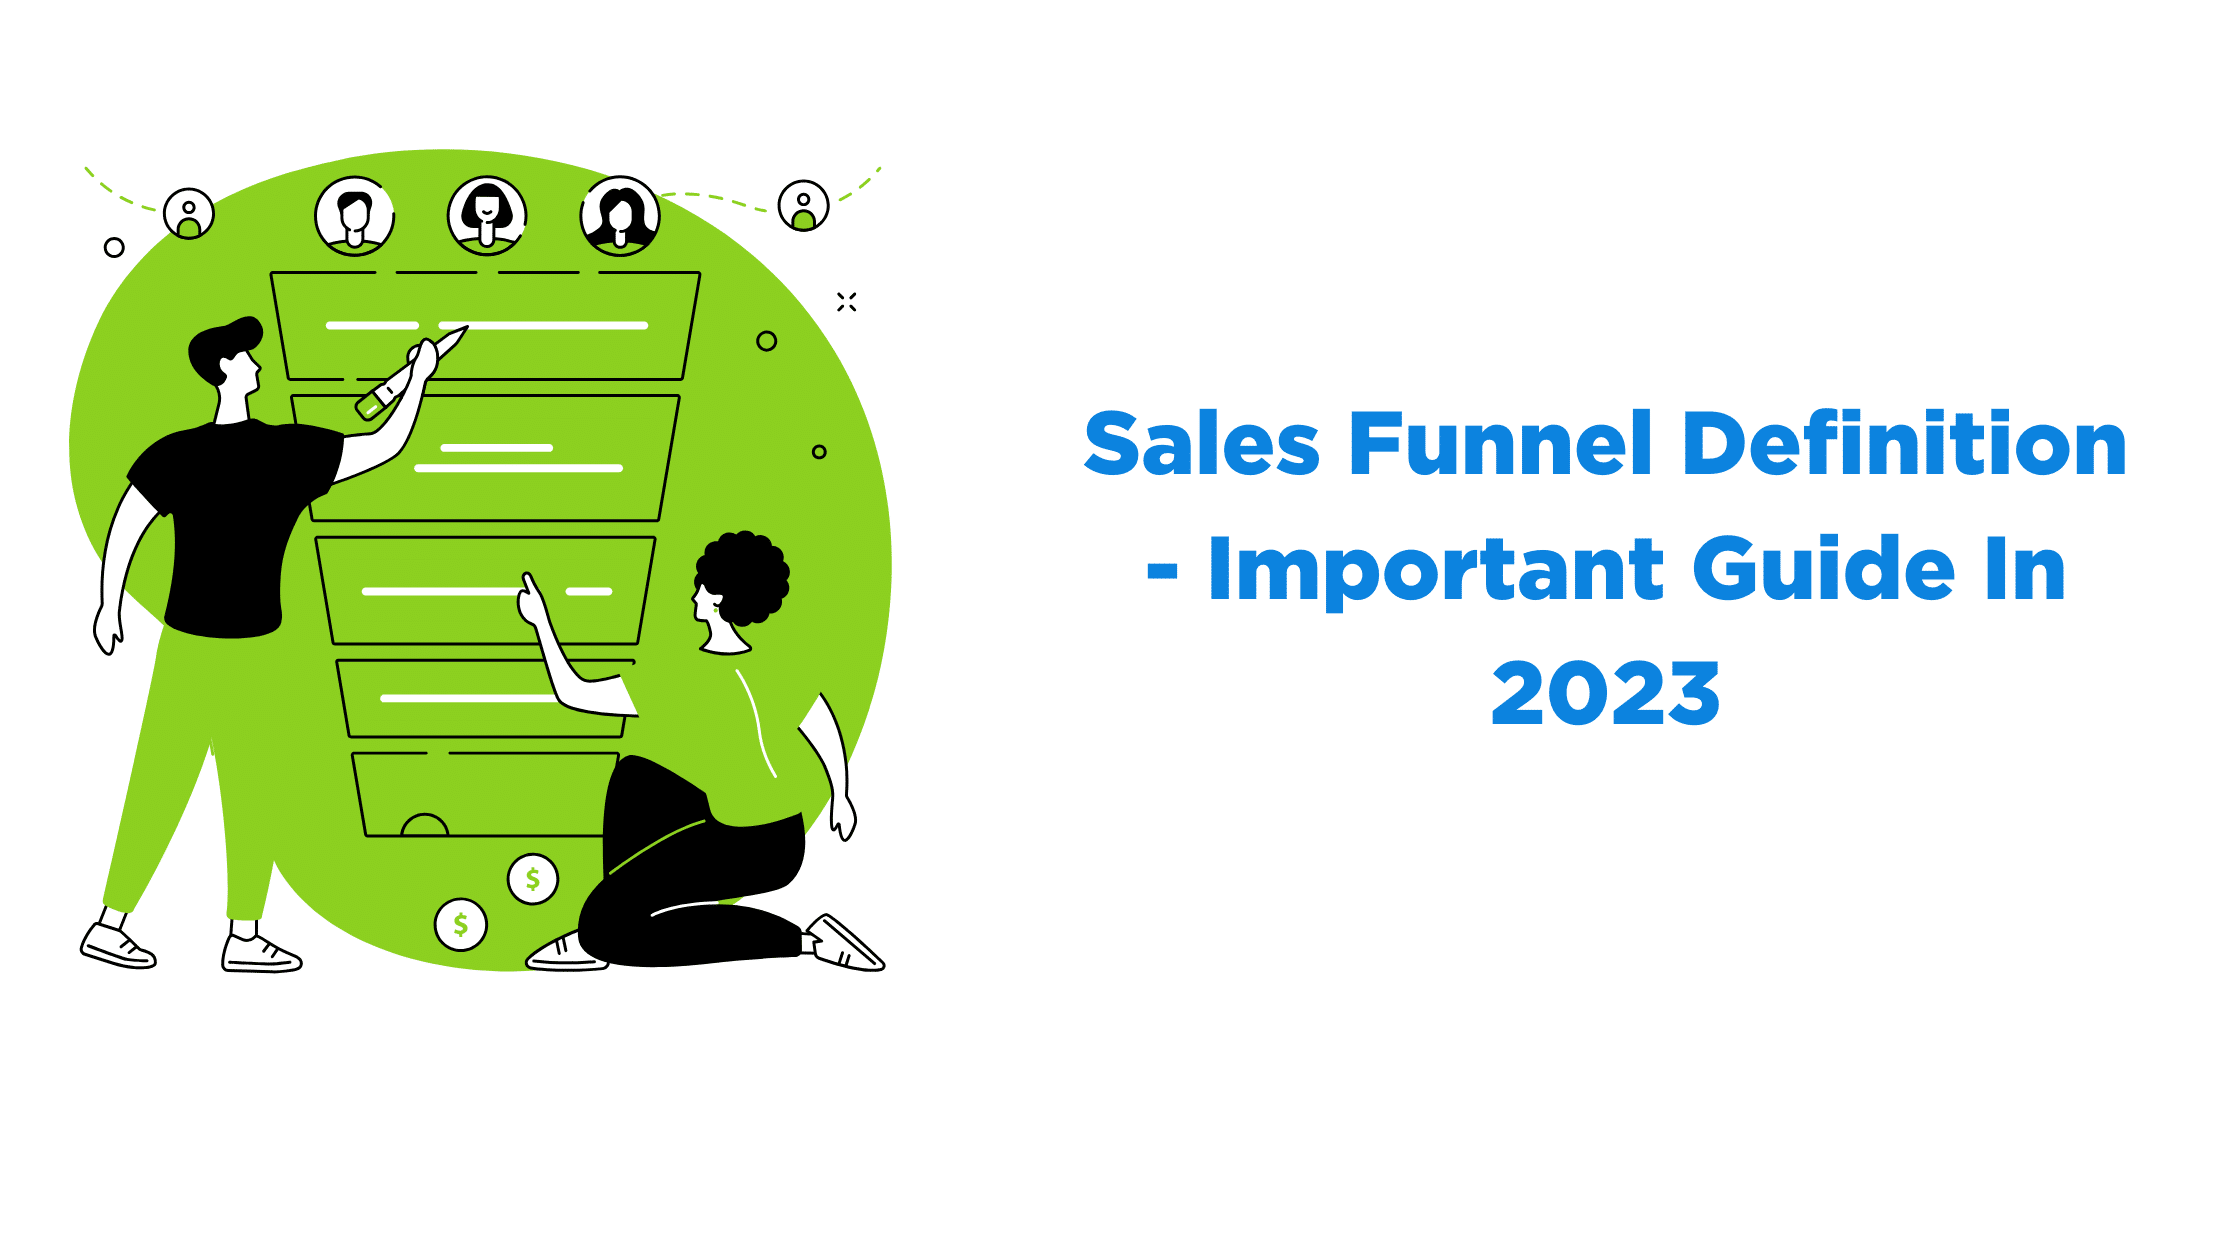 Sales Funnel Definition – Important Guide In 2023